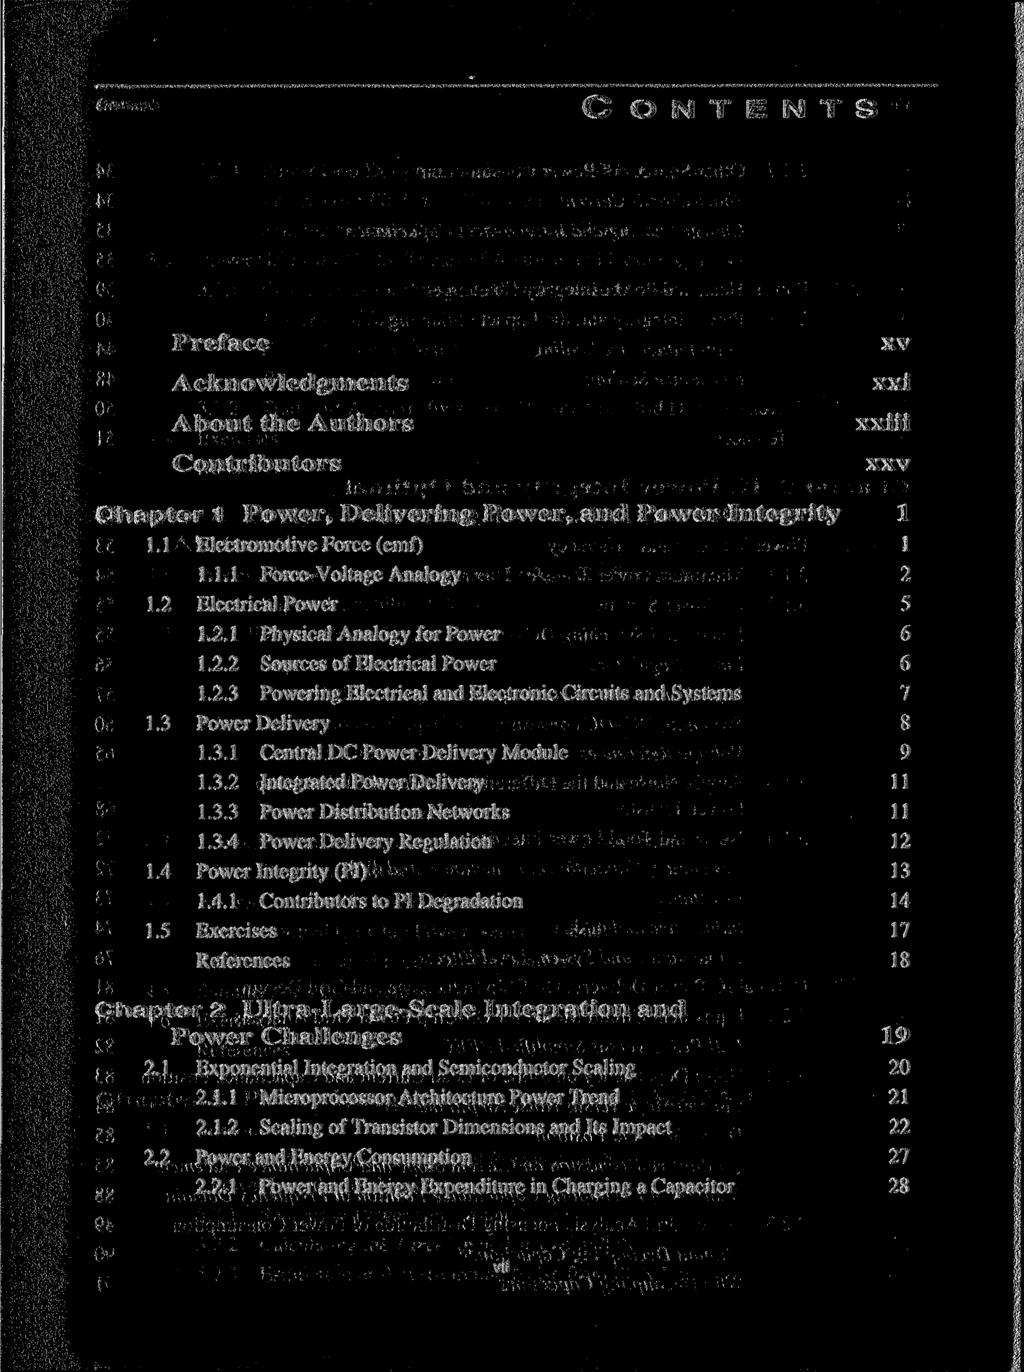 C O N T E N T S Preface Acknowledgments About the Authors Contributors xv xxi xxiii xxv Chapter 1 Power, Delivering Power, and Power Integrity 1 1.1 Electromotive Force (emf) 1 1.1.1 Force-Voltage Analogy 2 1.